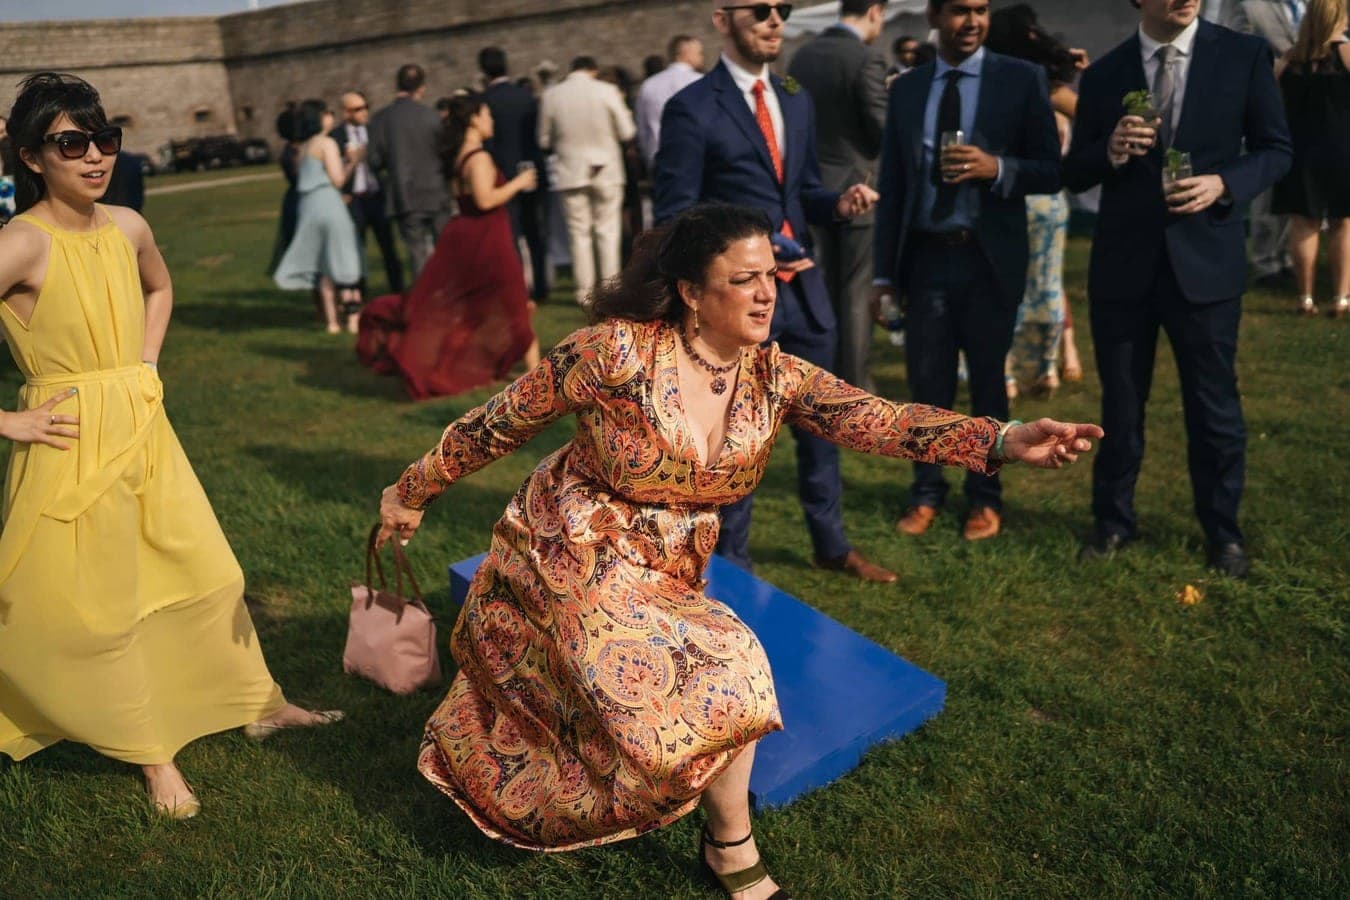 Woman plays hacky-sack during wedding reception in Rhode Island.